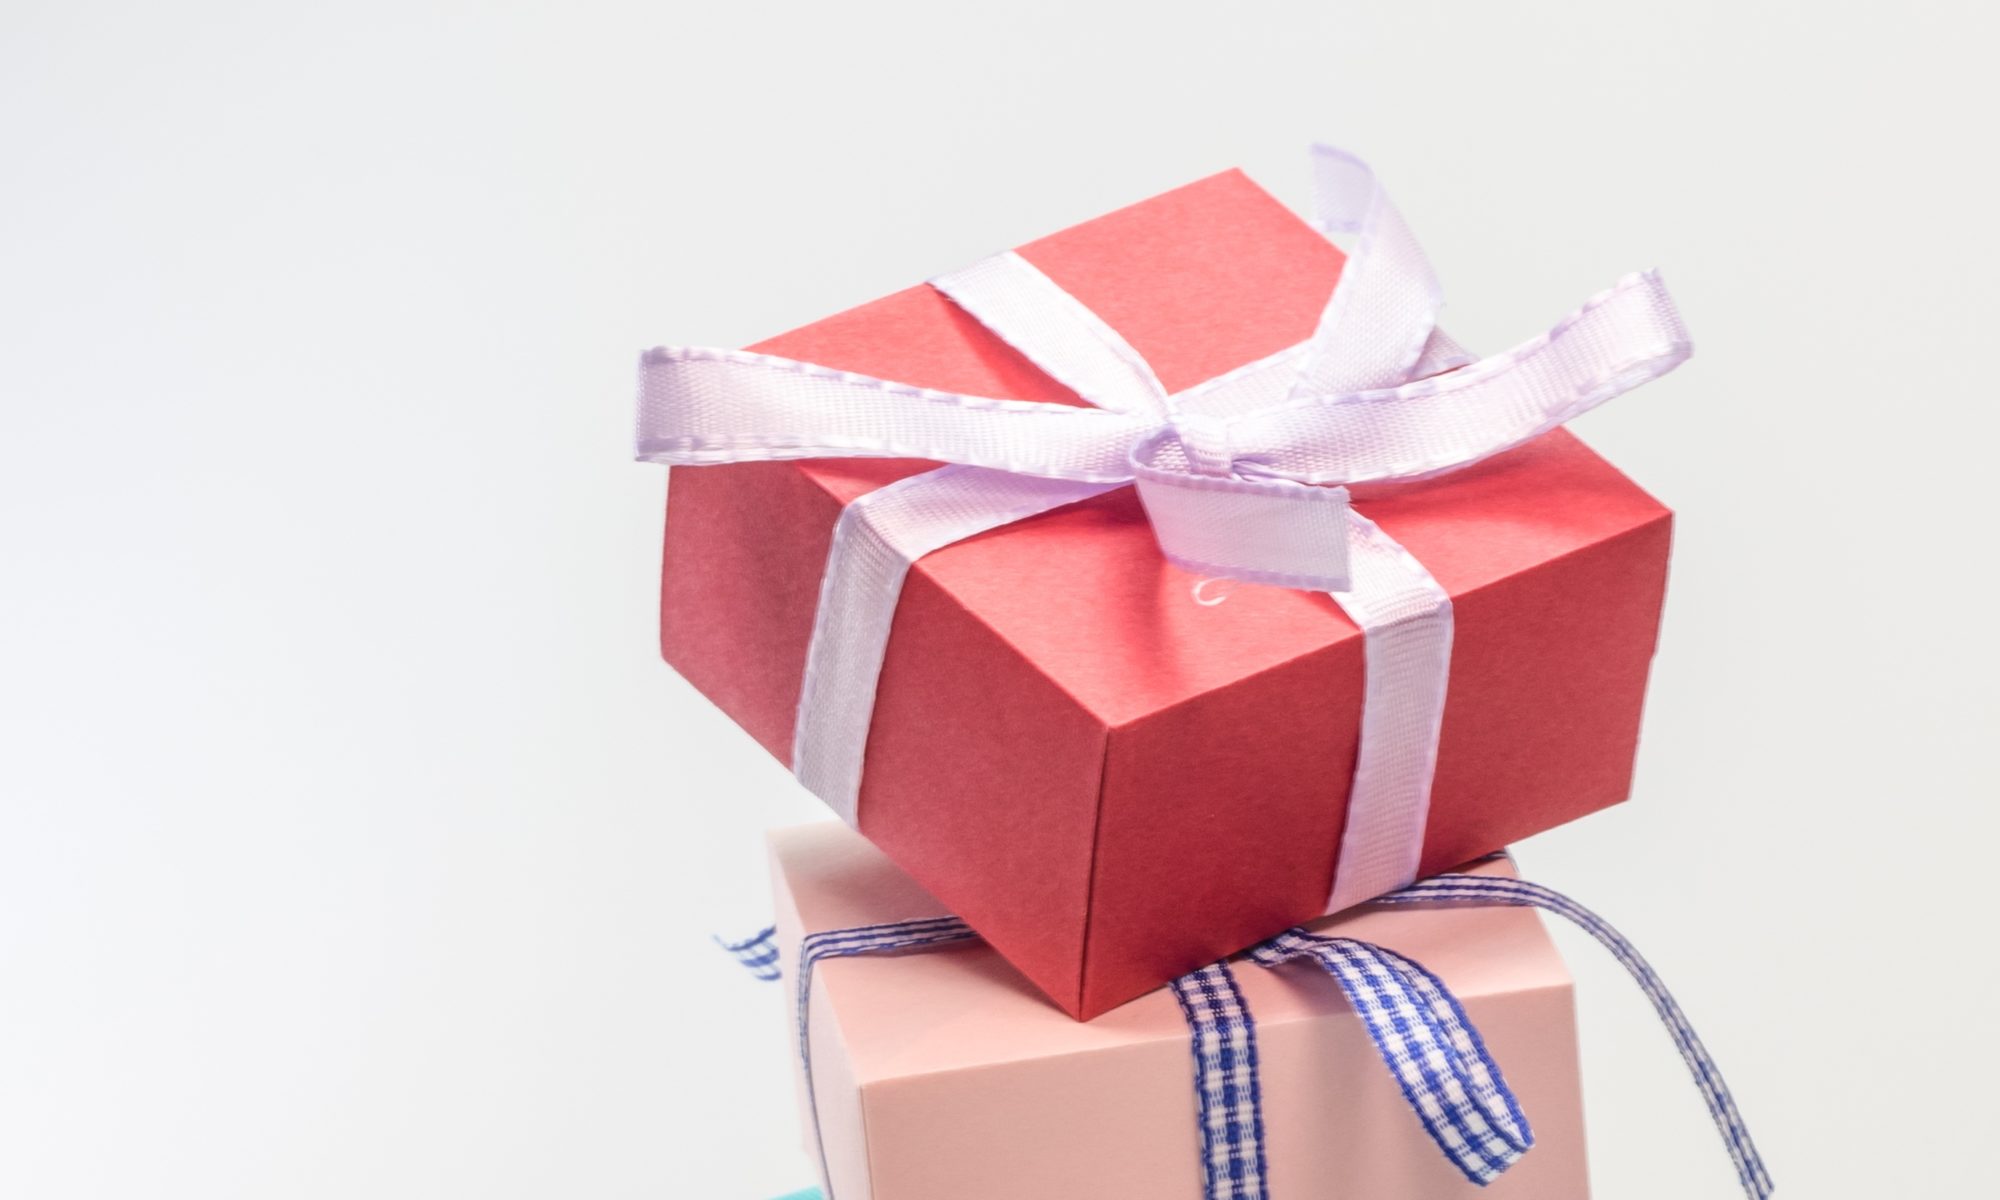 Three stacked gift boxes with different colors